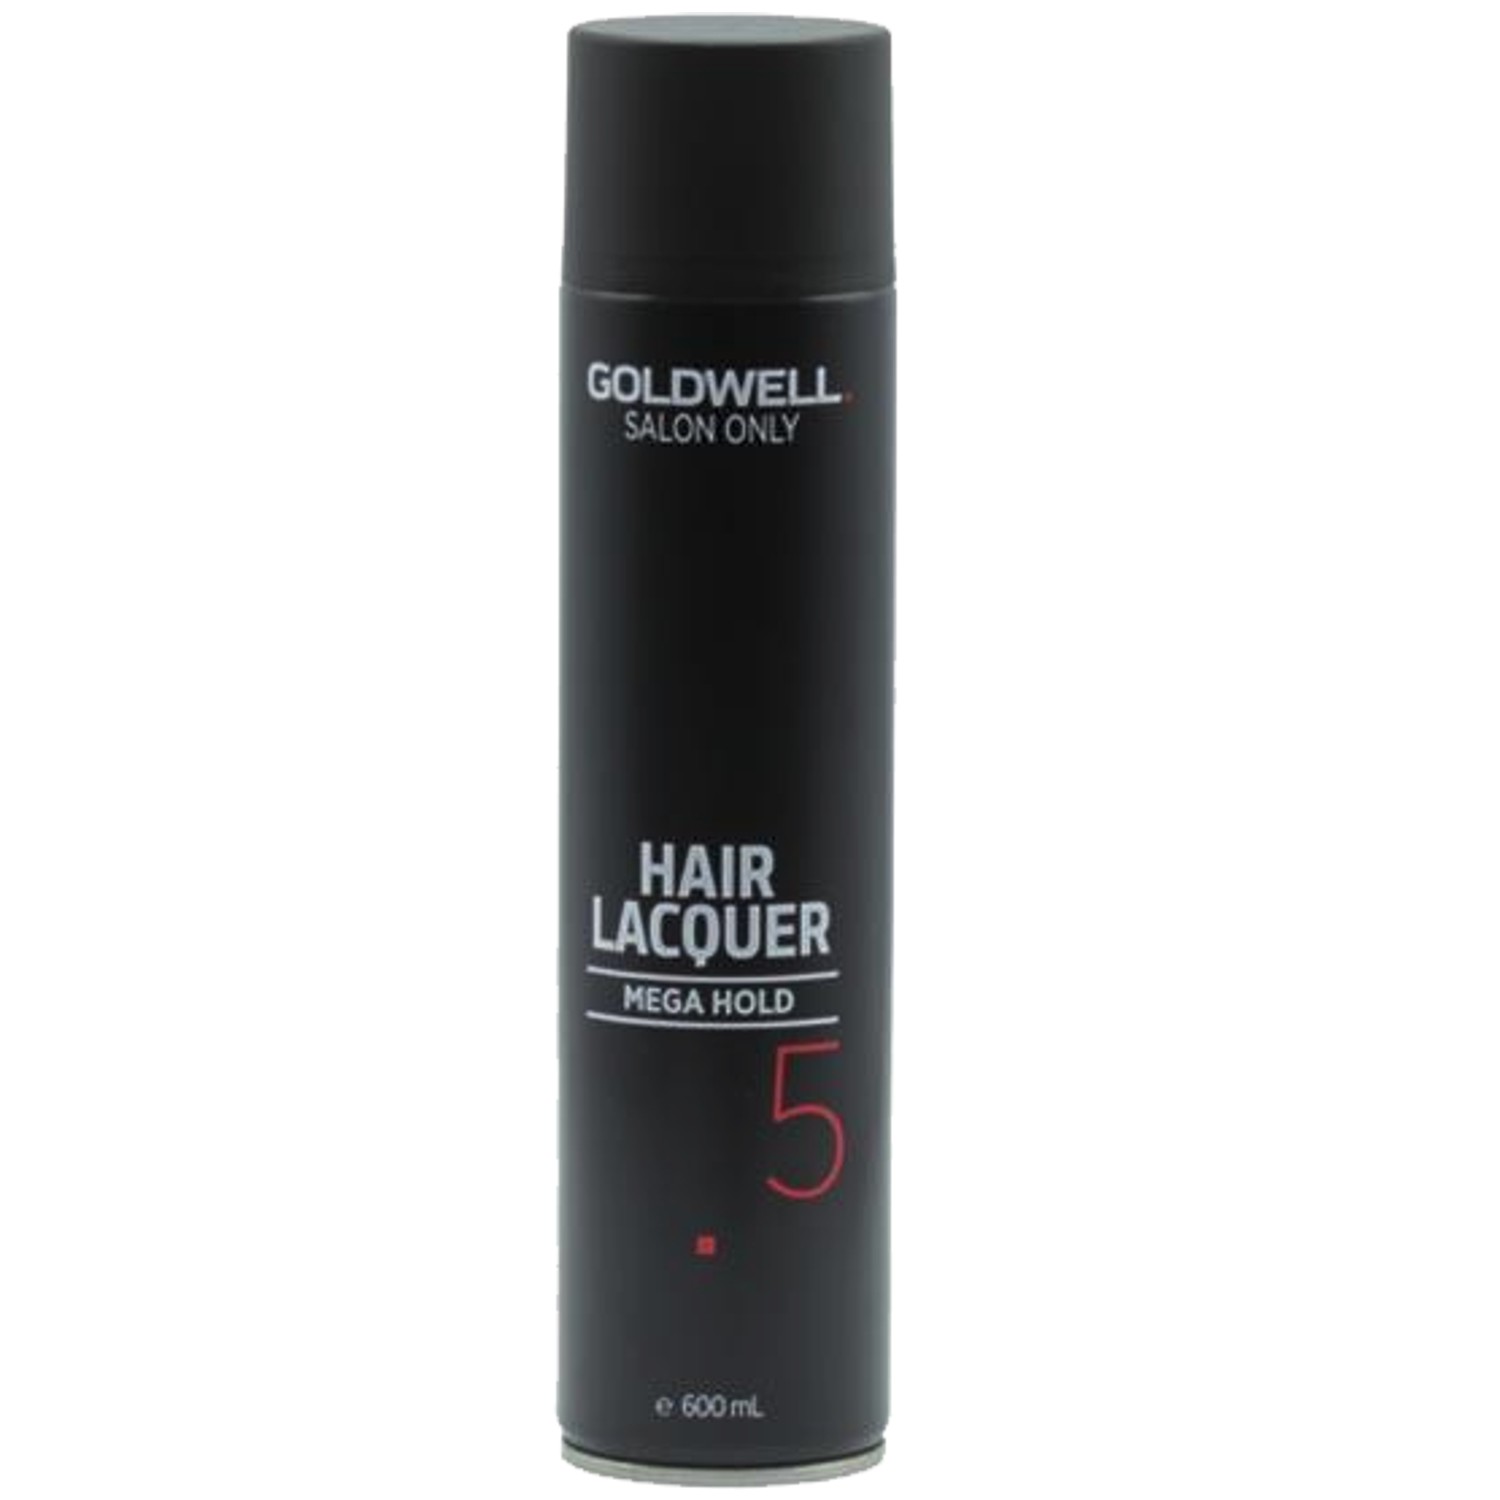 GOLDWELL Salon Only Hair Lacquer 600 ml